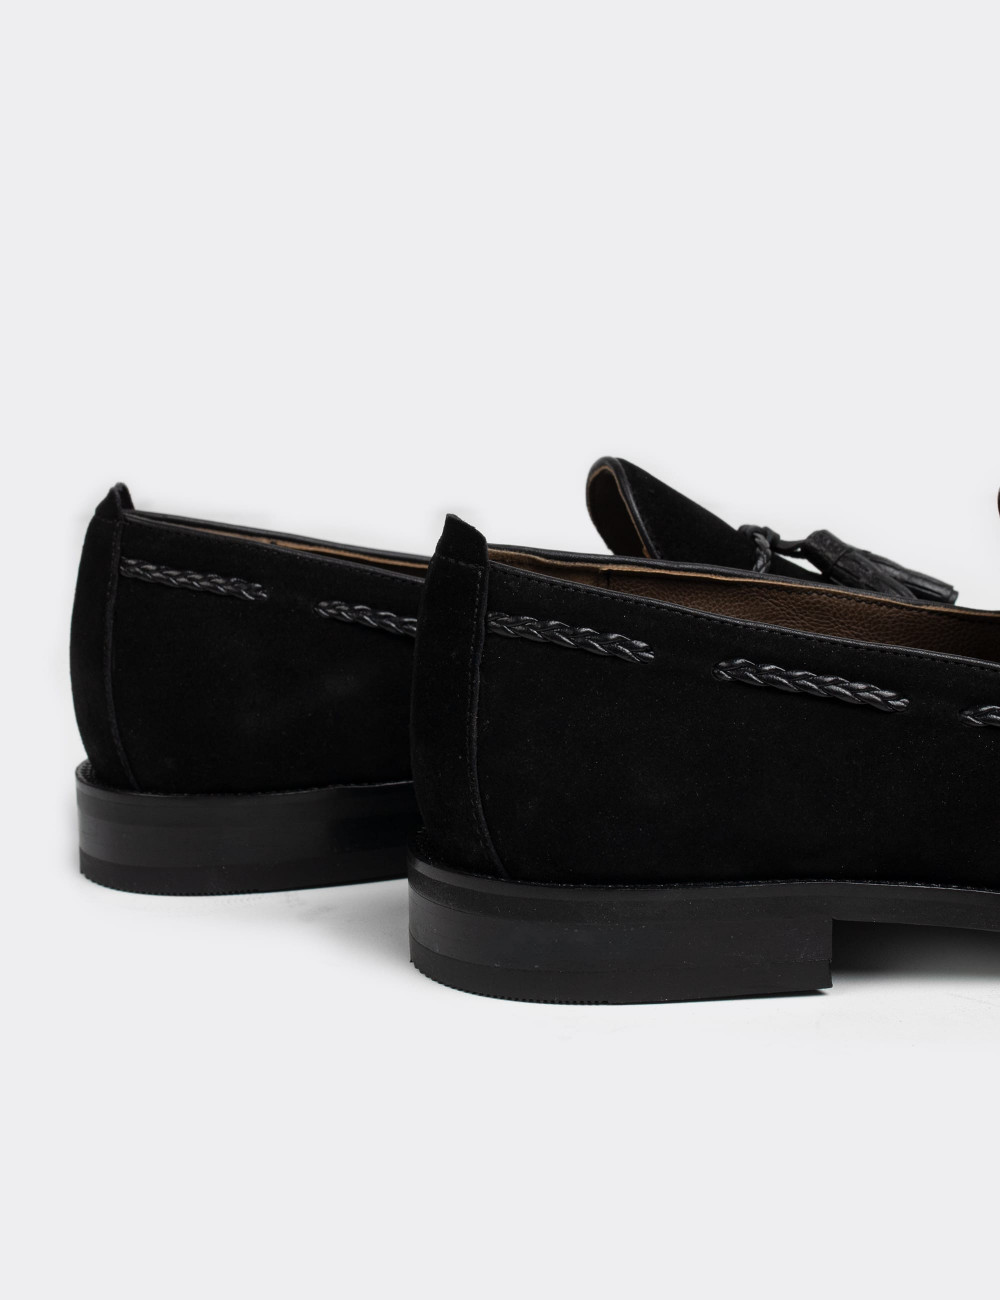 Black Suede Leather Loafers - 01642MSYHM03